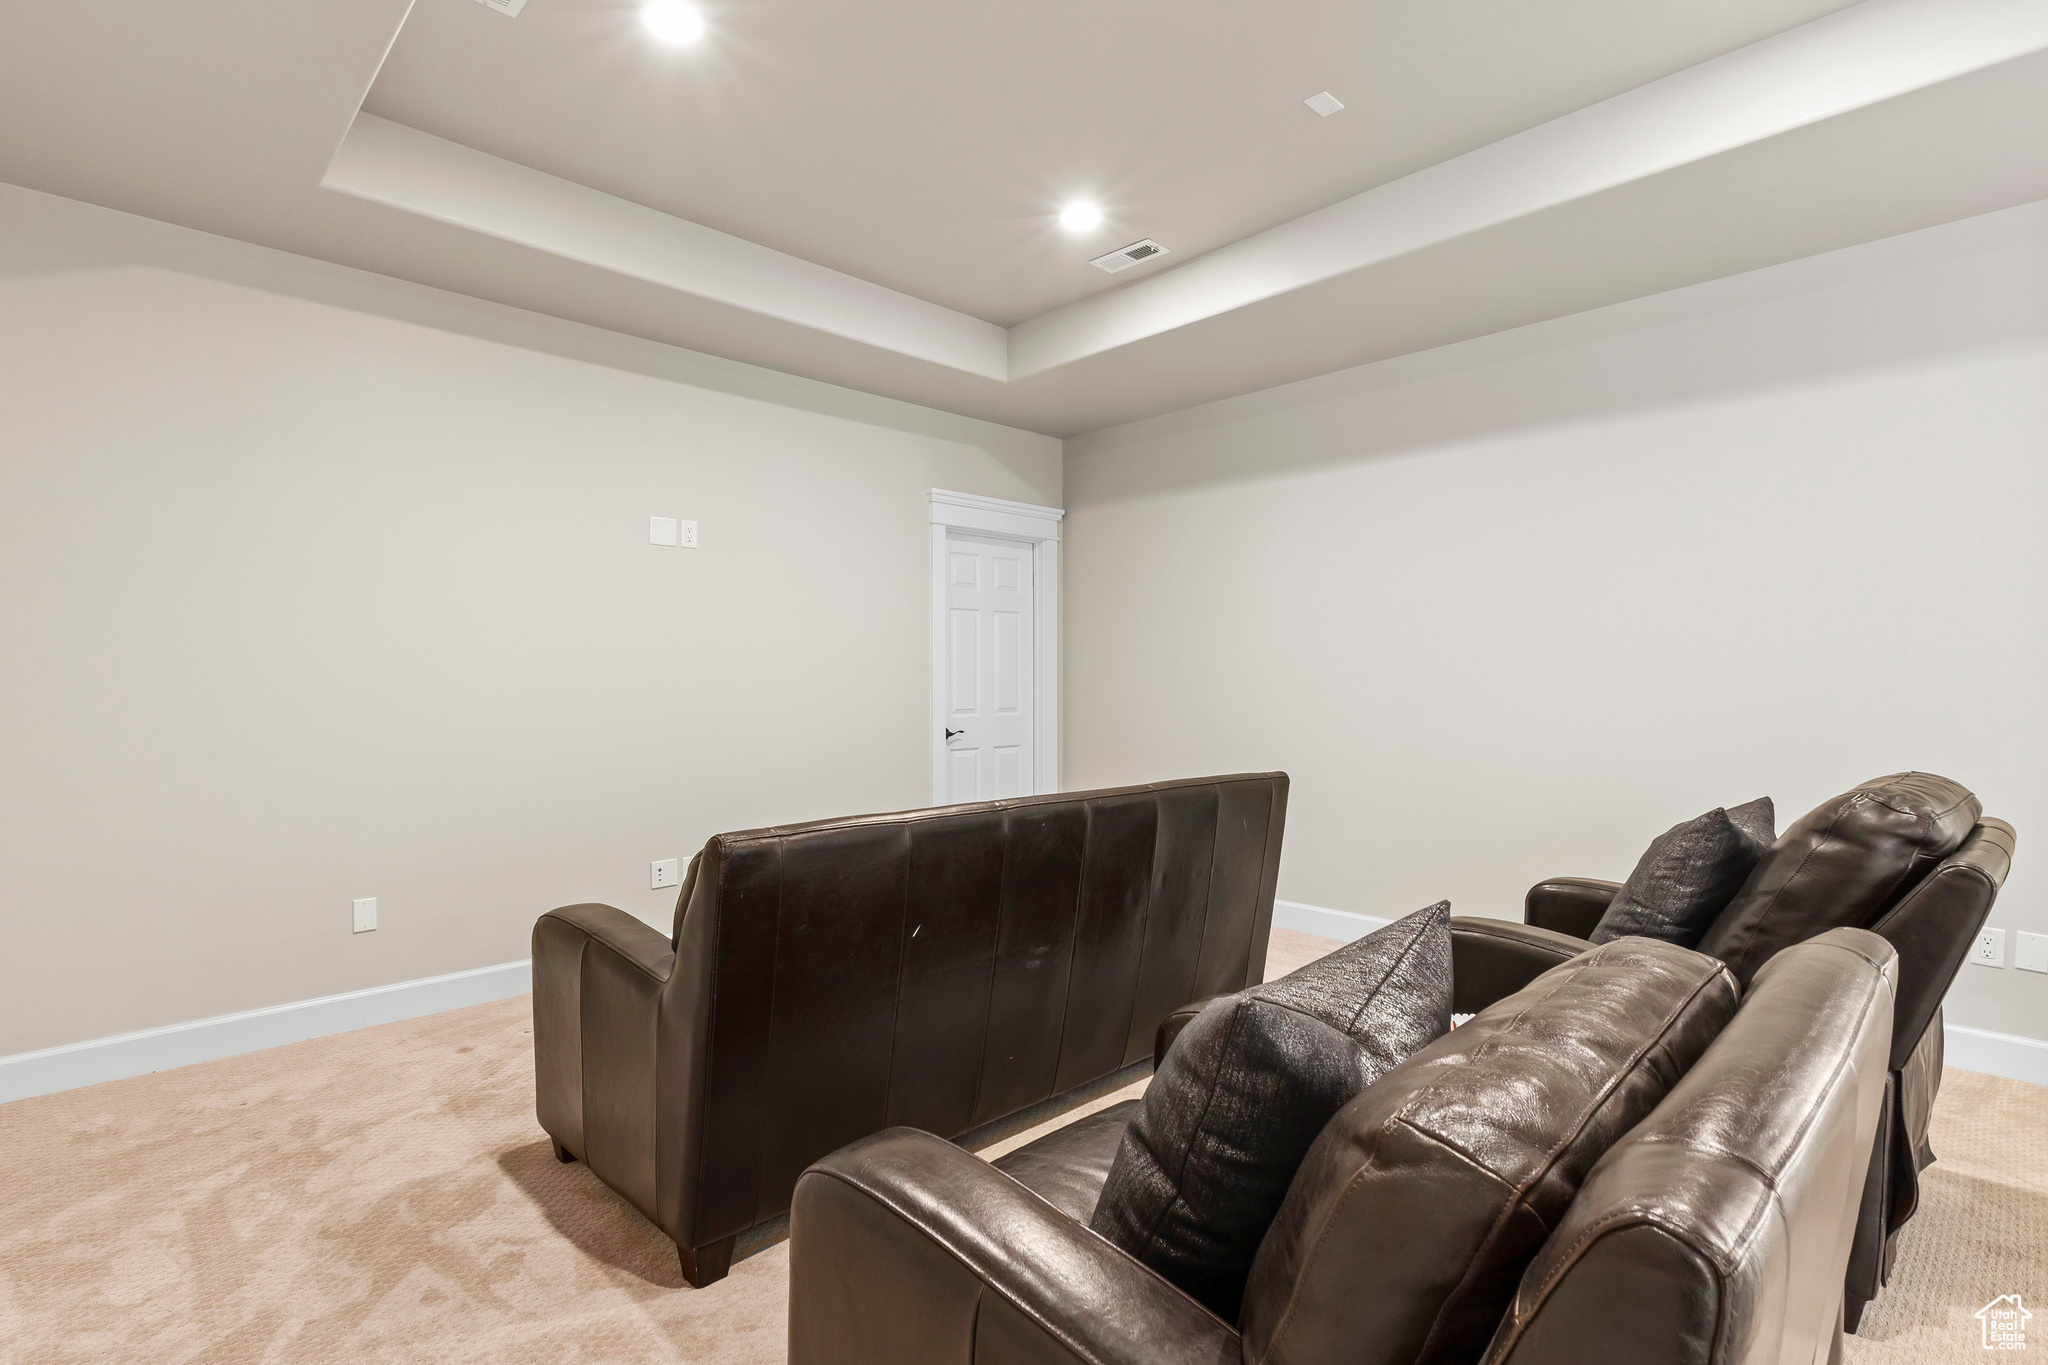 Home theater room with a raised ceiling and light carpet